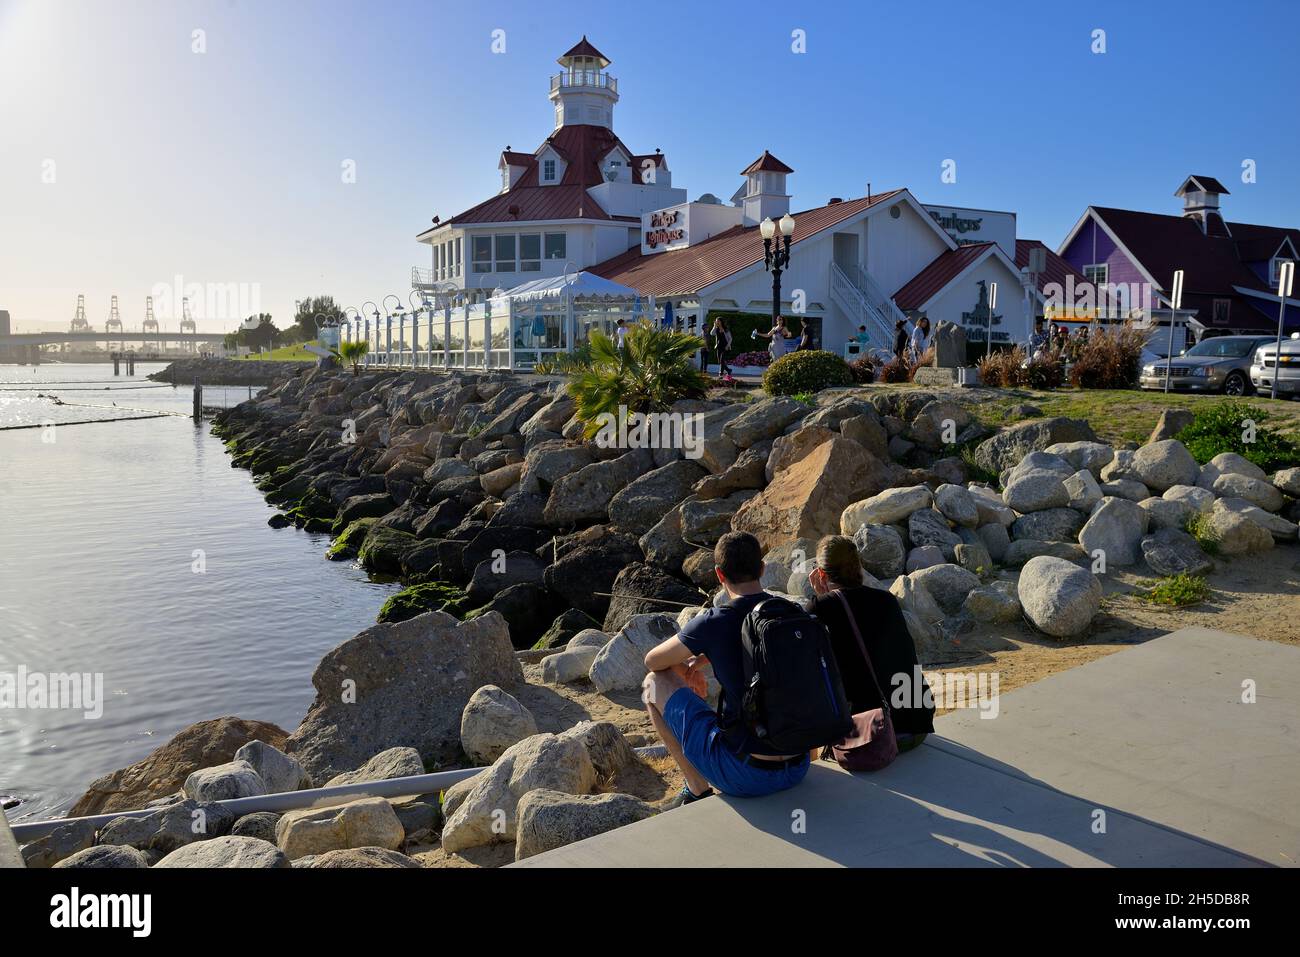 A sunny spring afternoon at the Shoreline Village and Marina, Long Beach CA Stock Photo